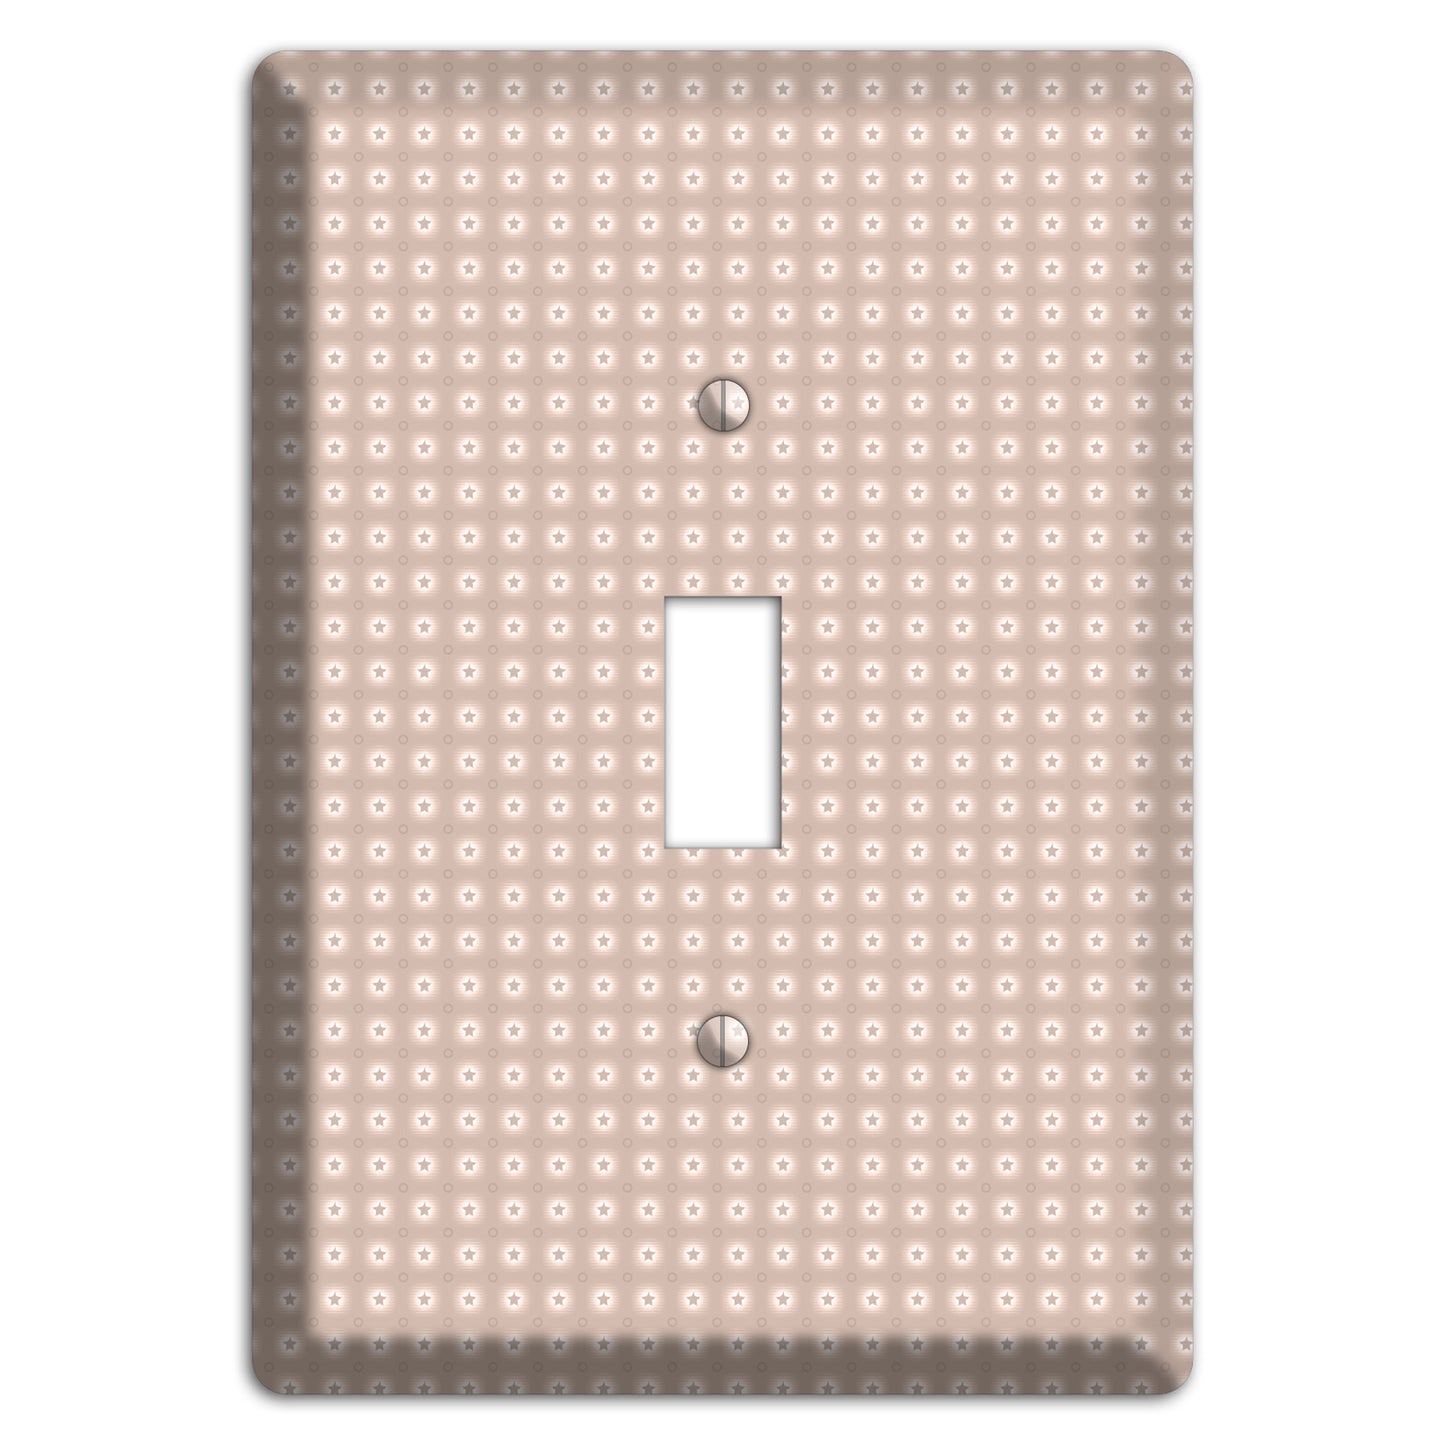 Beige with Circled Stars Cover Plates